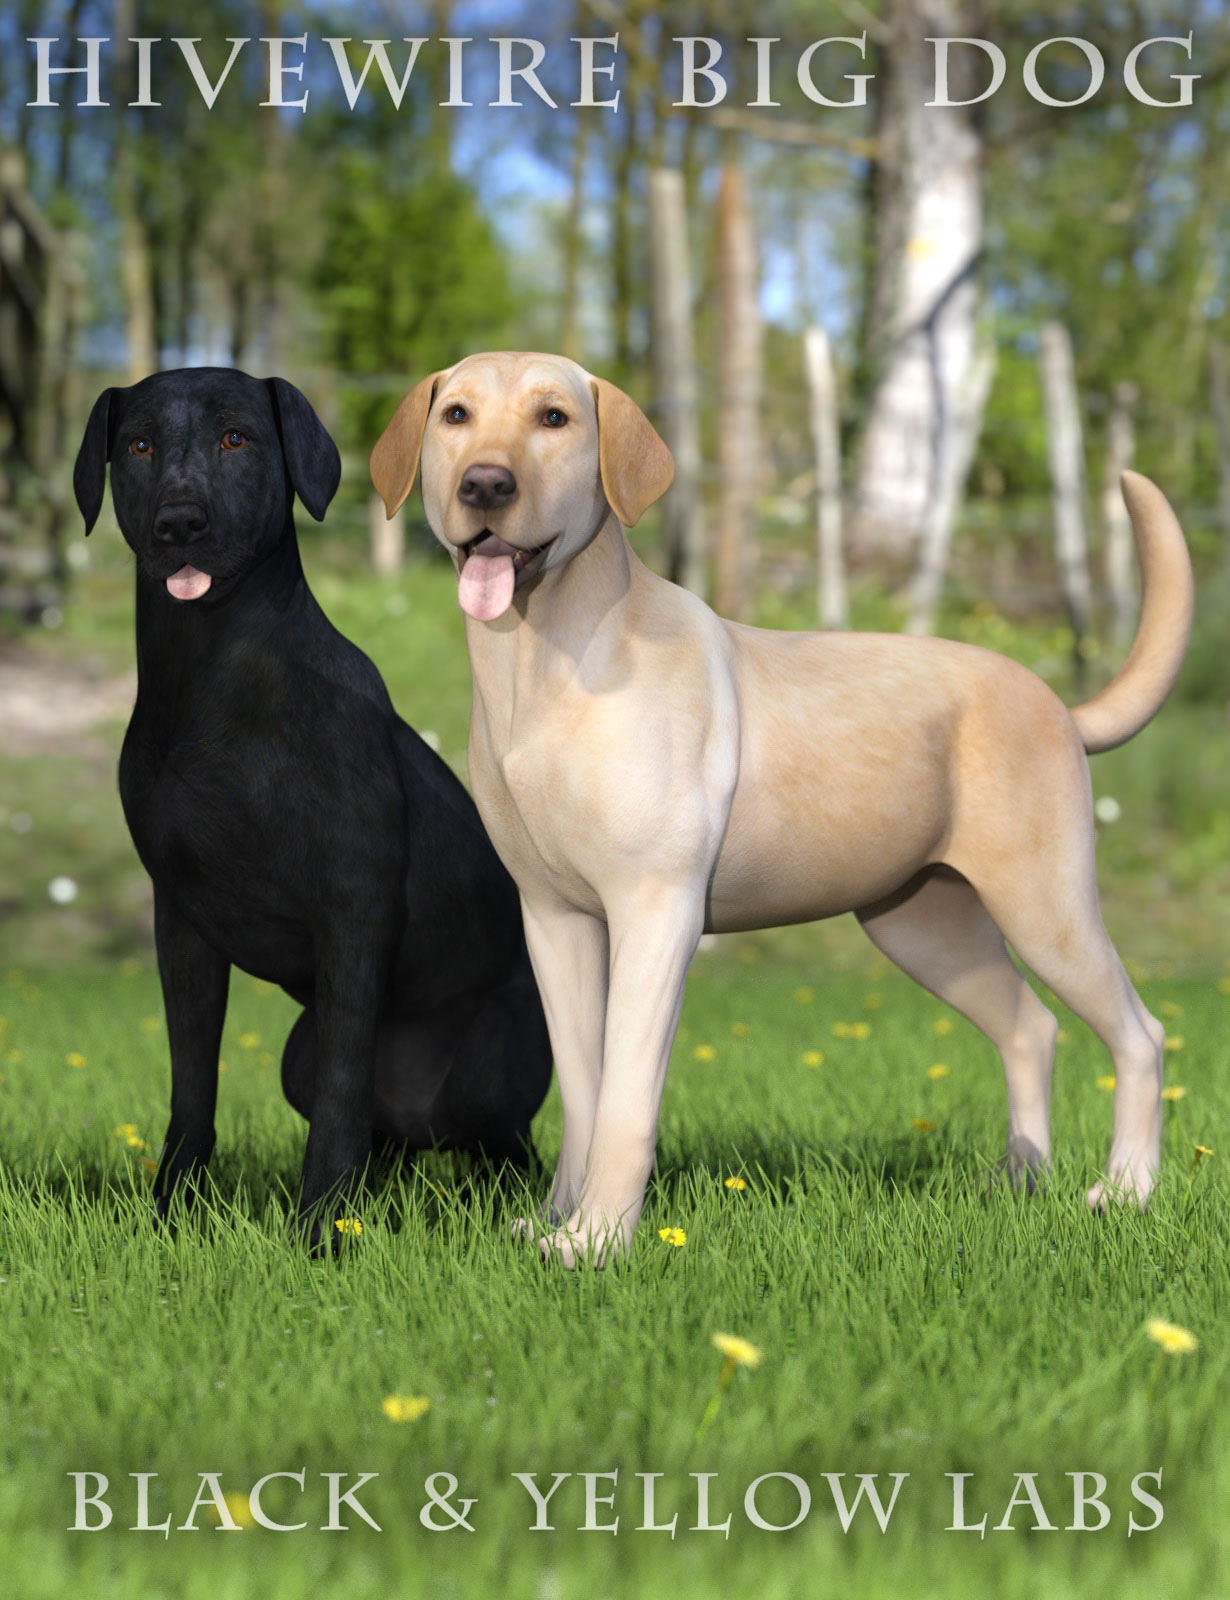 Black and Yellow Labs for the HiveWire Big Dog_DAZ3DDL